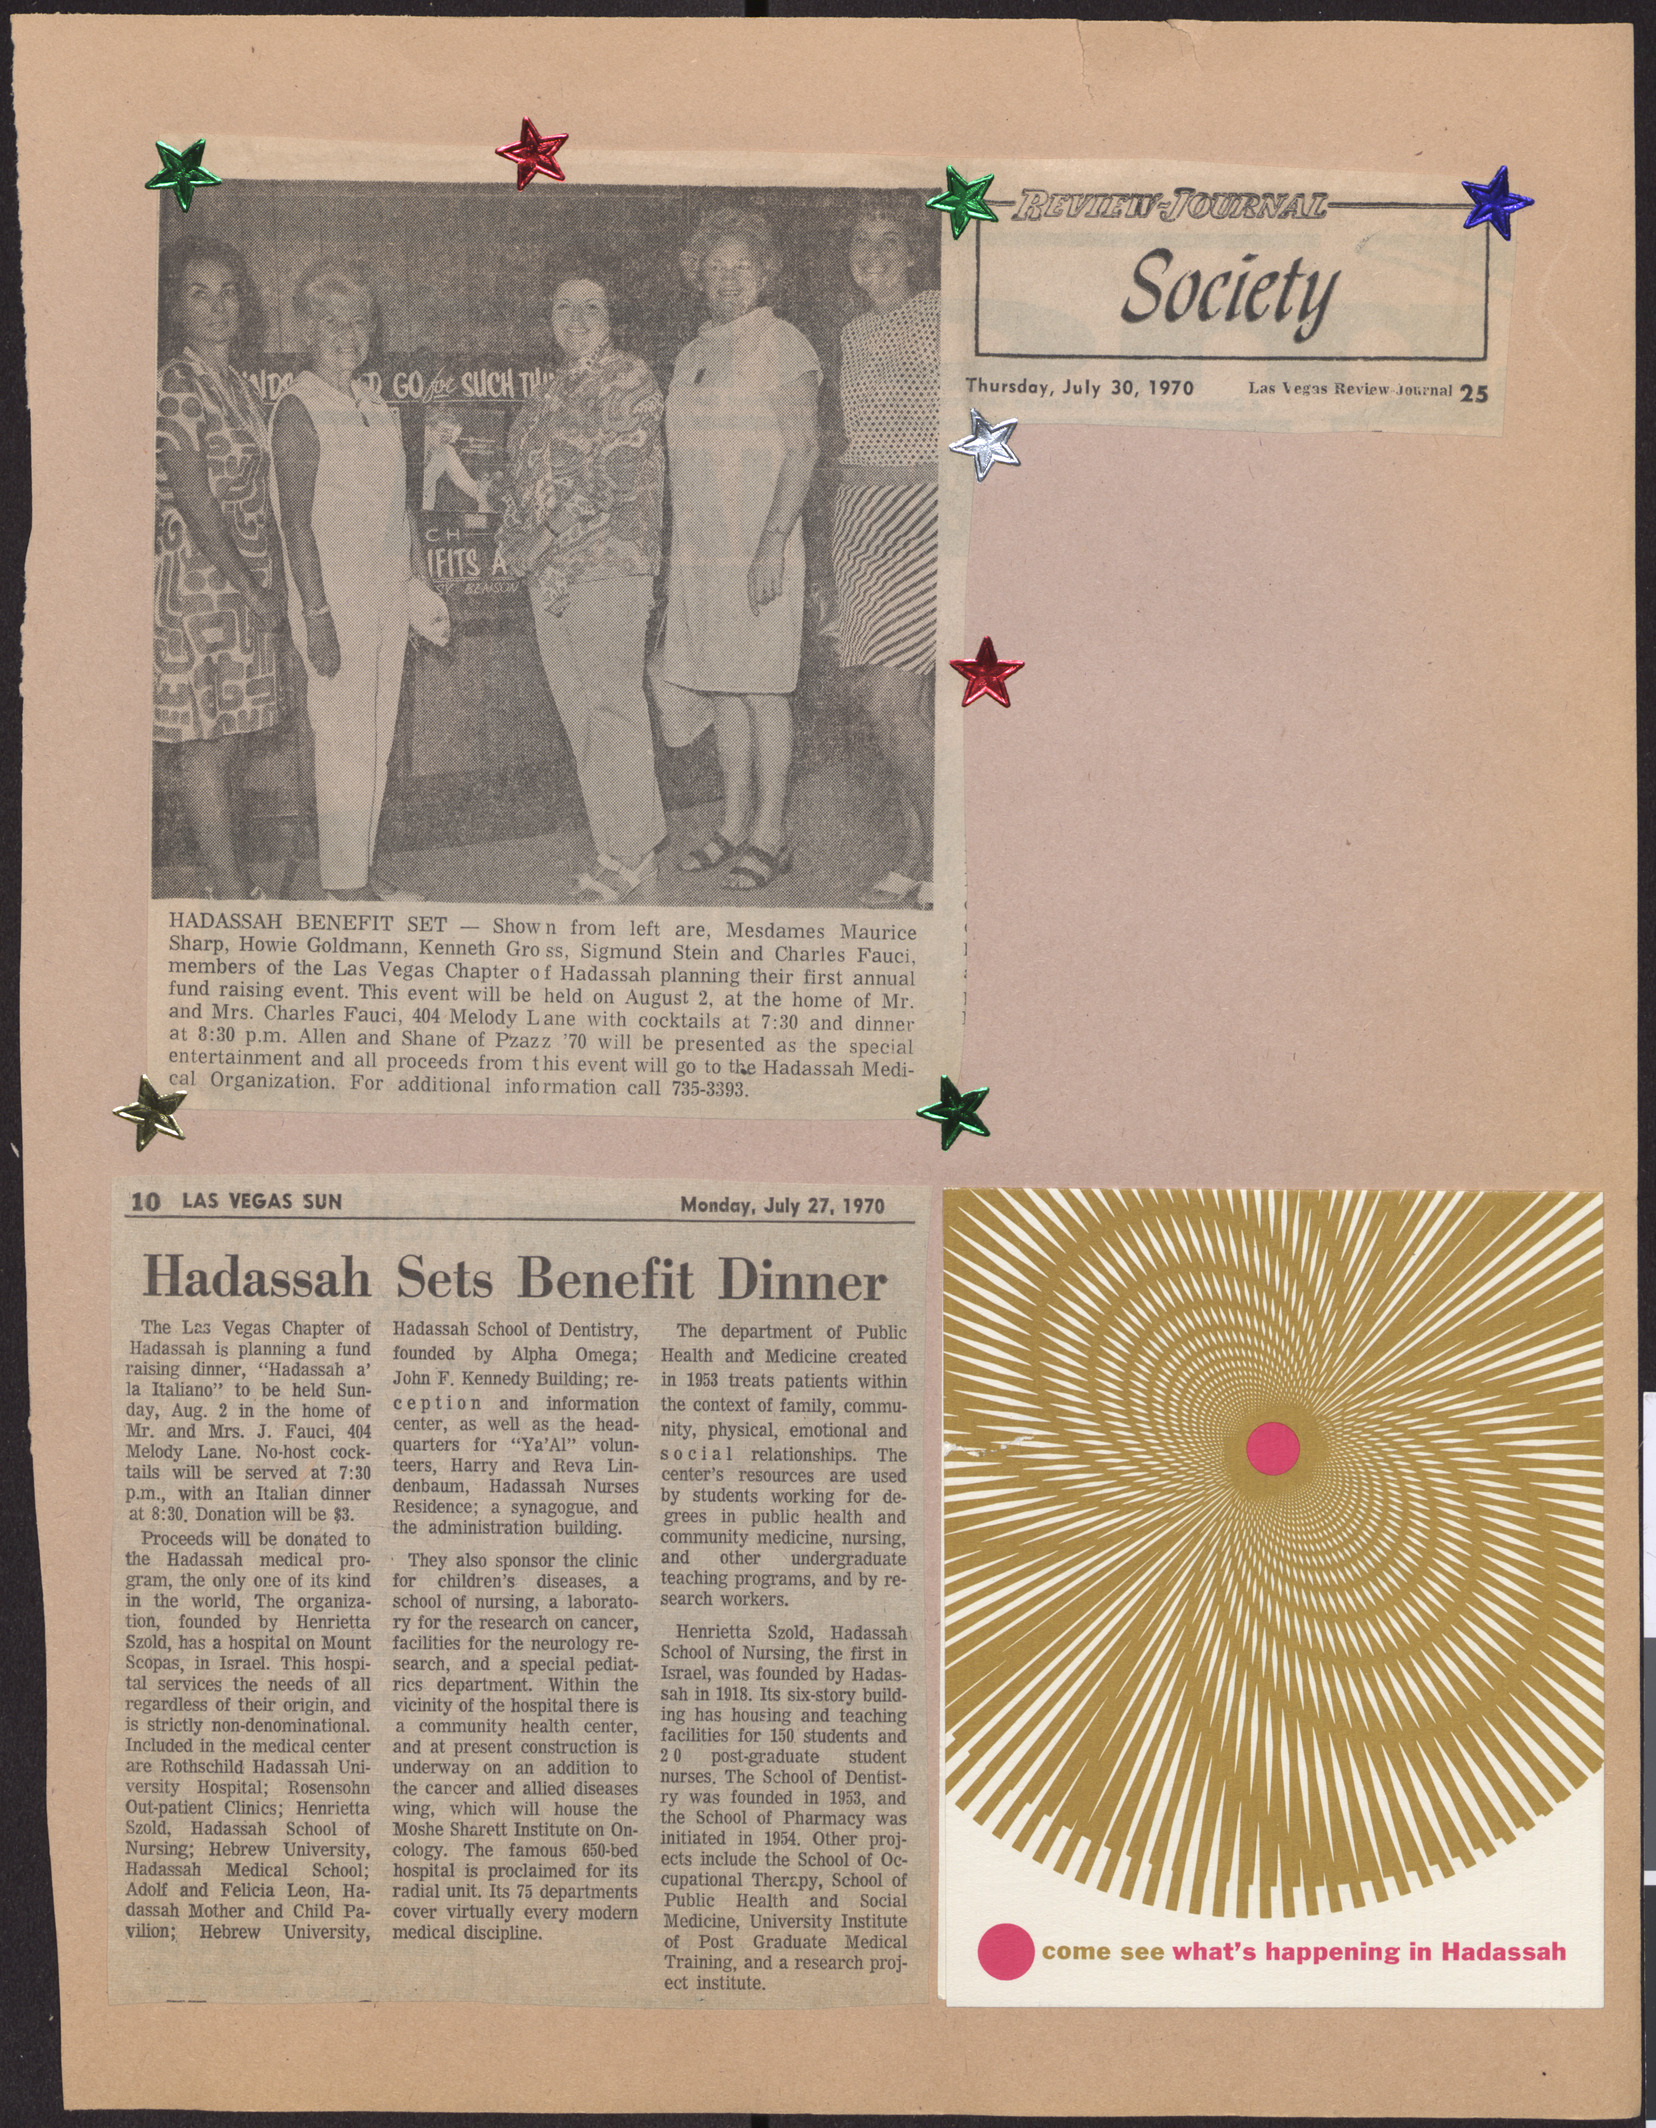 Newspaper clippings about Hadassah benefit event and invitation, July 1970